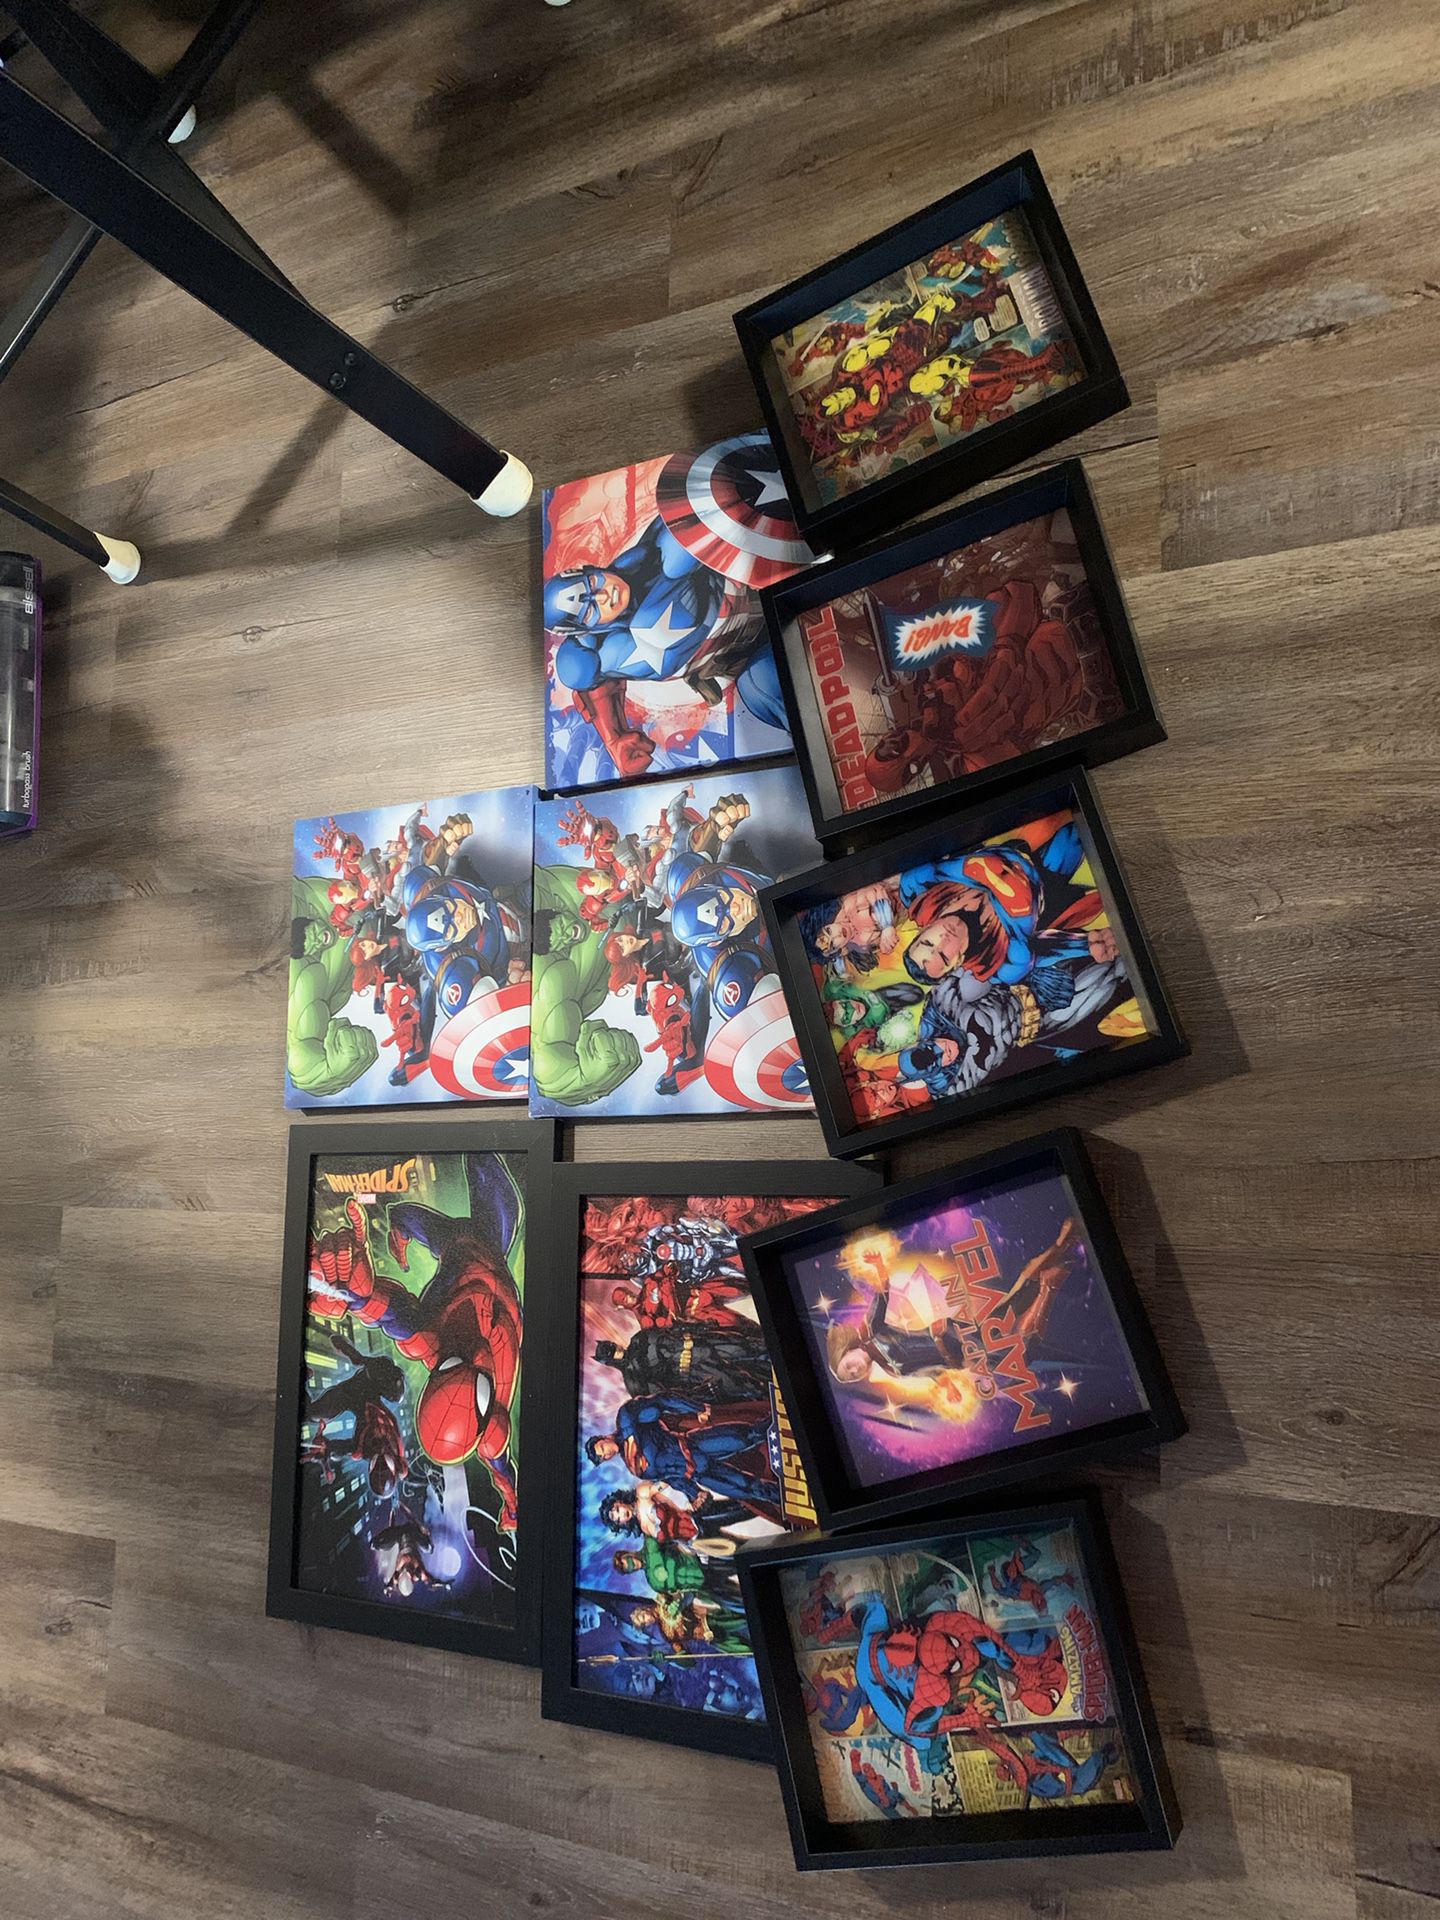 Marvel pictures (take all for $30)